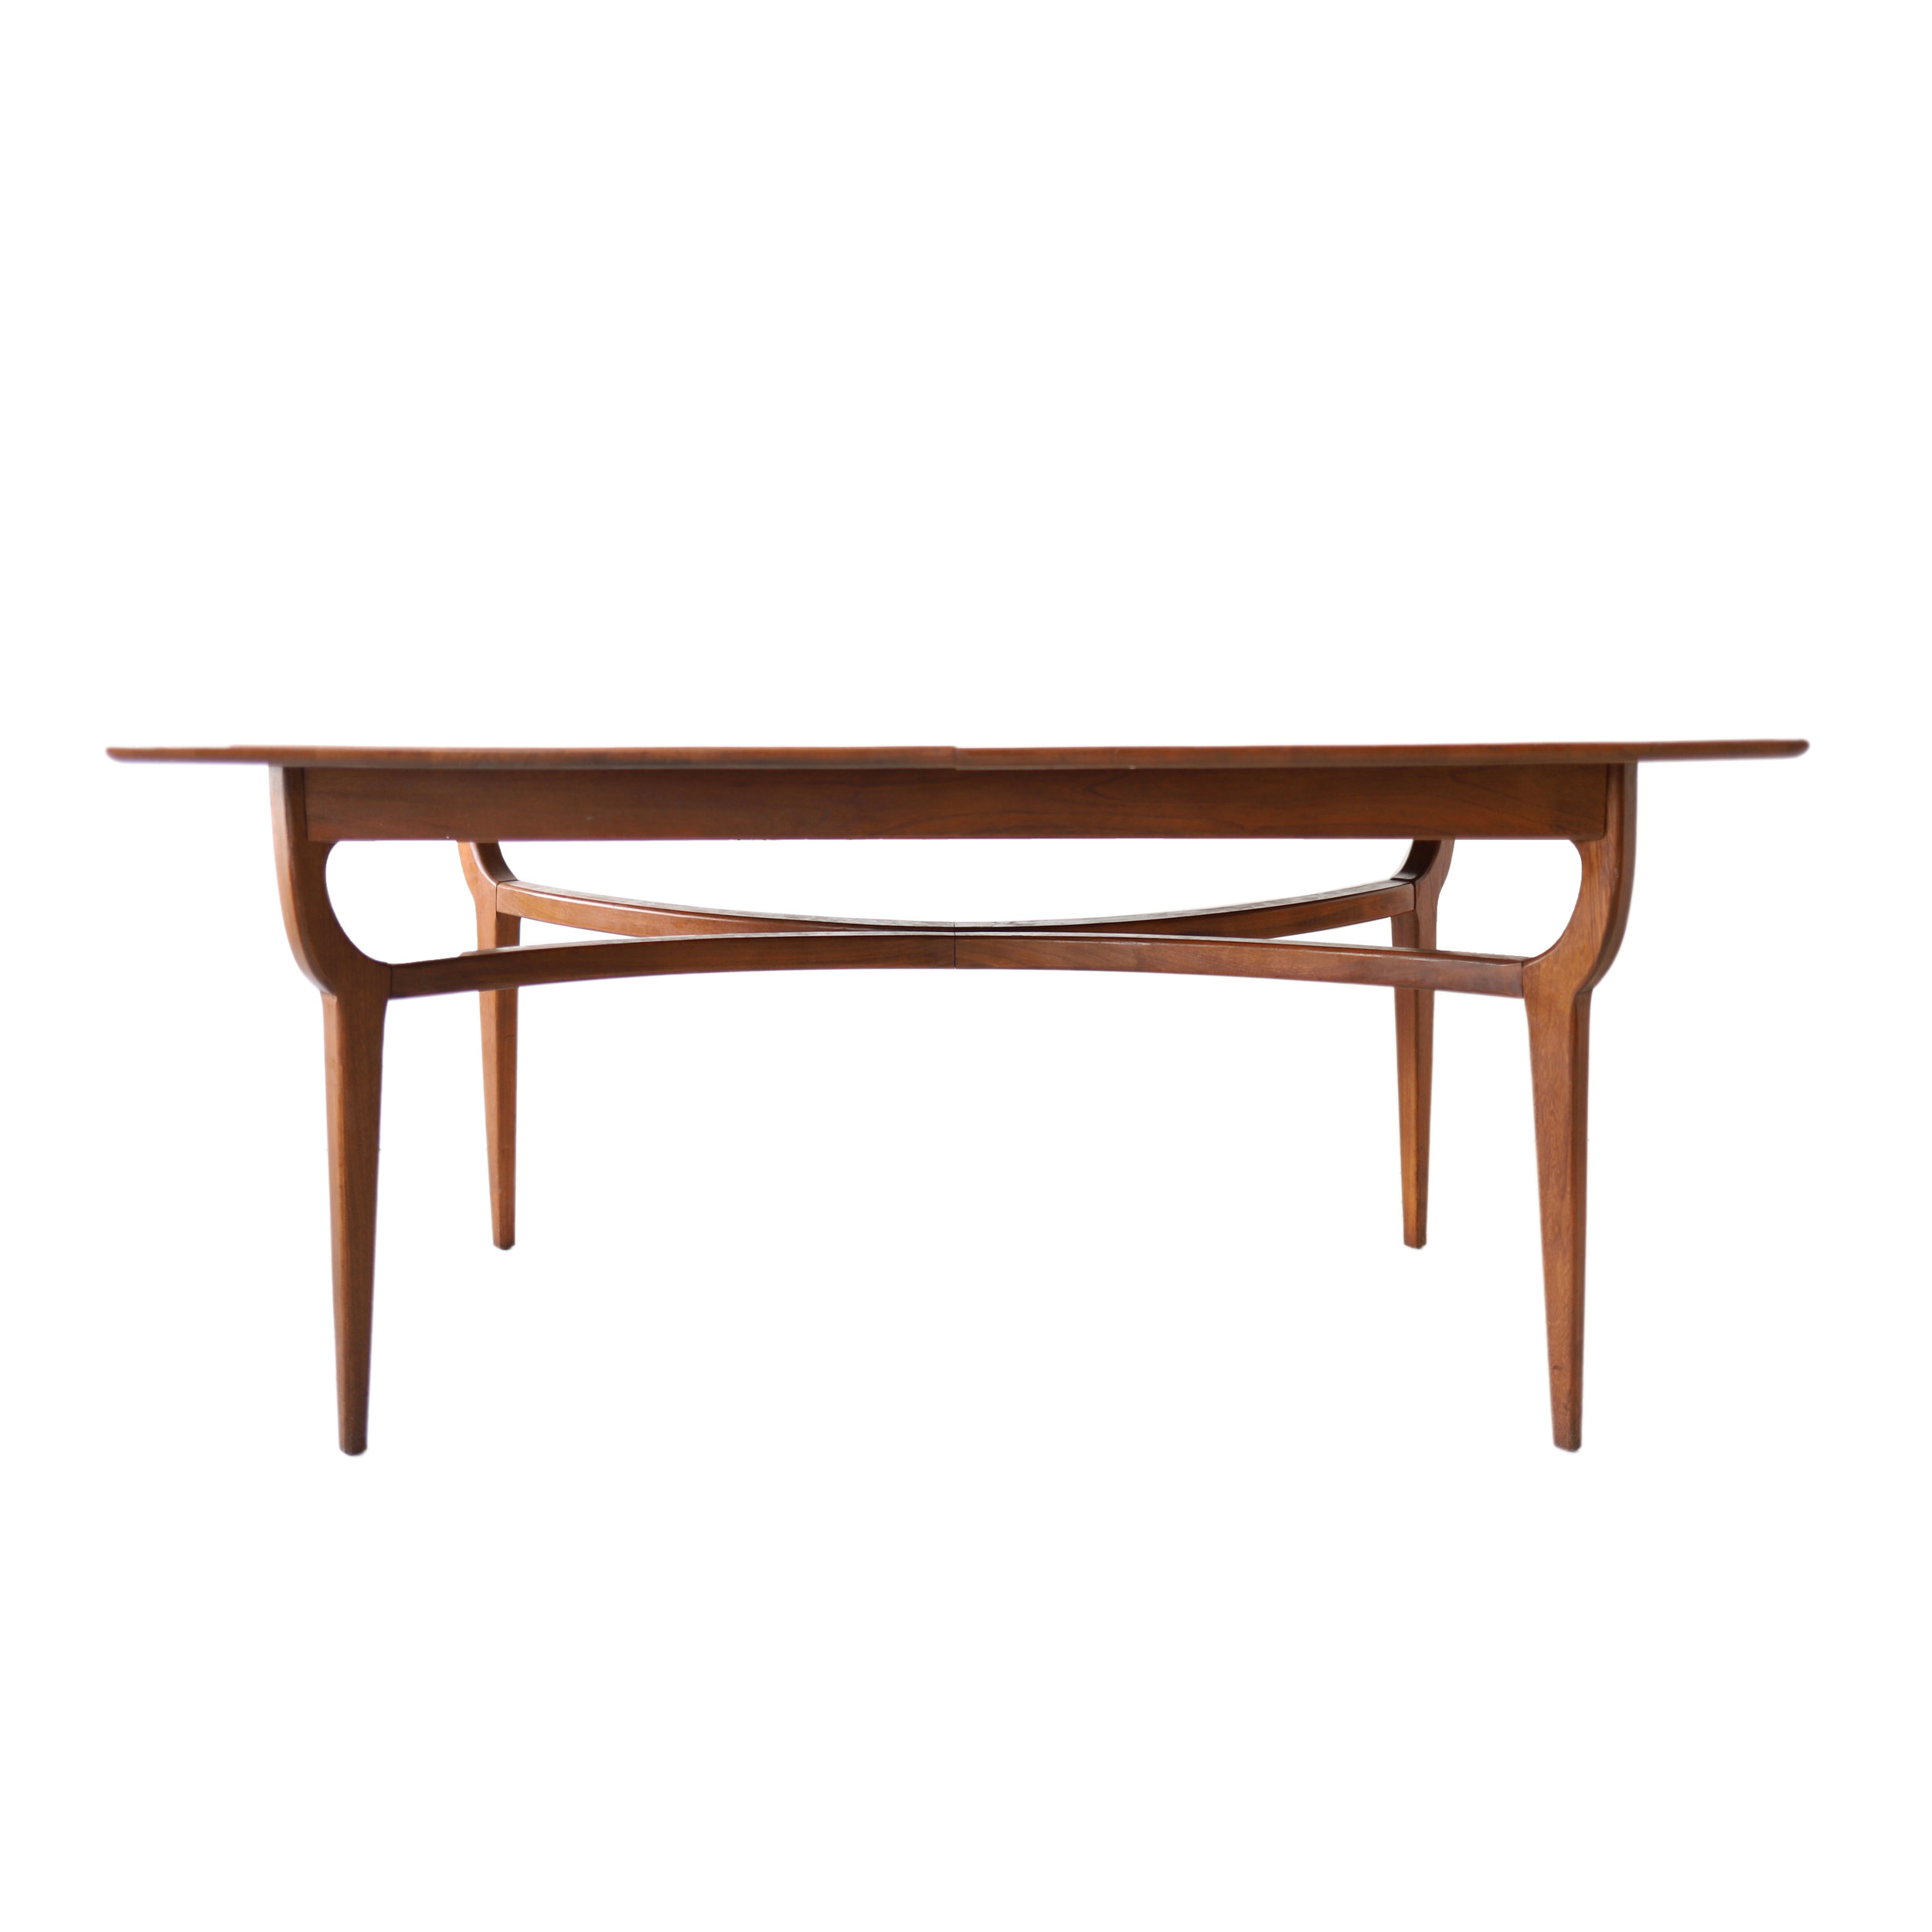 At 1st Sight New Products Vintage Mid Century Modern Extending Geometric Walnut Dining Table